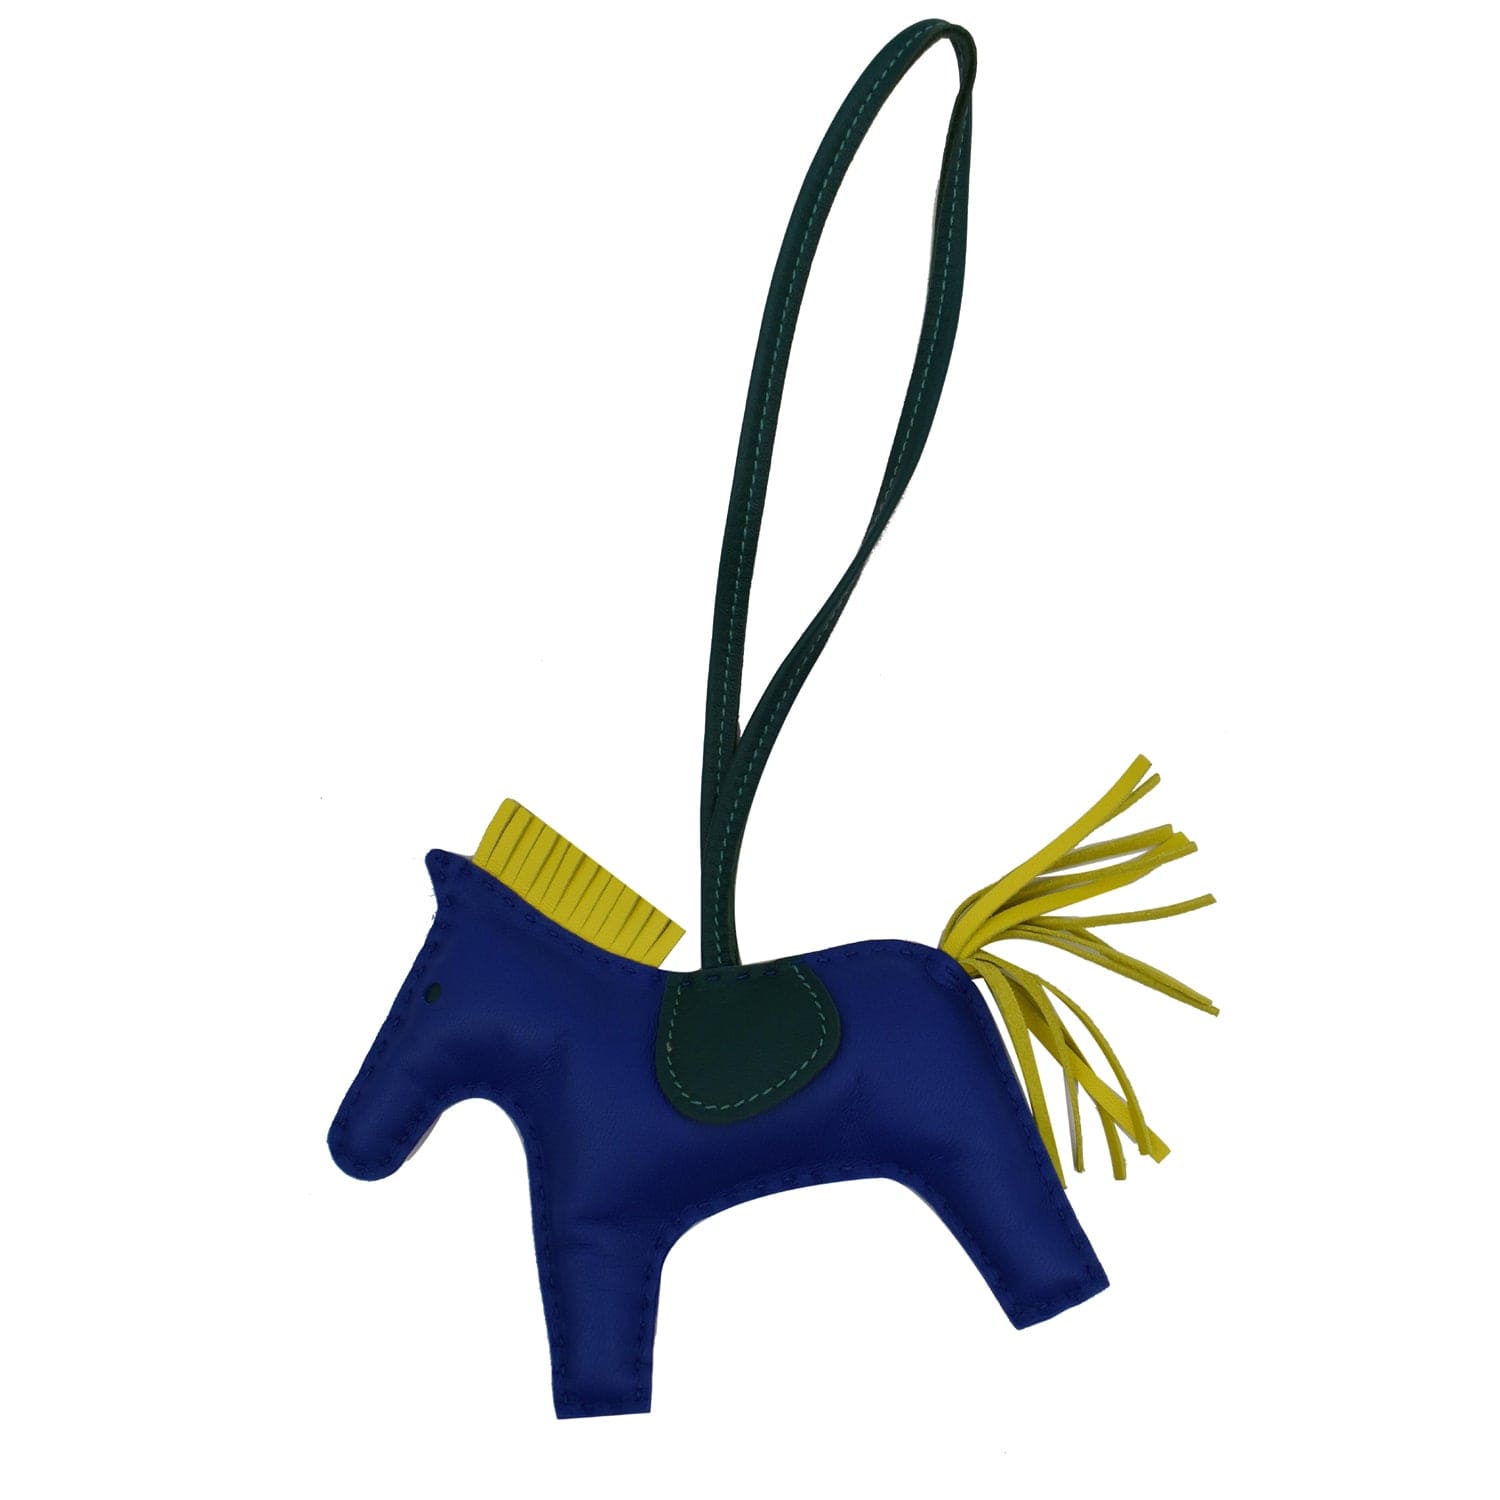 SPECIAL! Authentic NEW Hermes Rodeo Horse Hair bag charm Celeste Blue Lime  MM